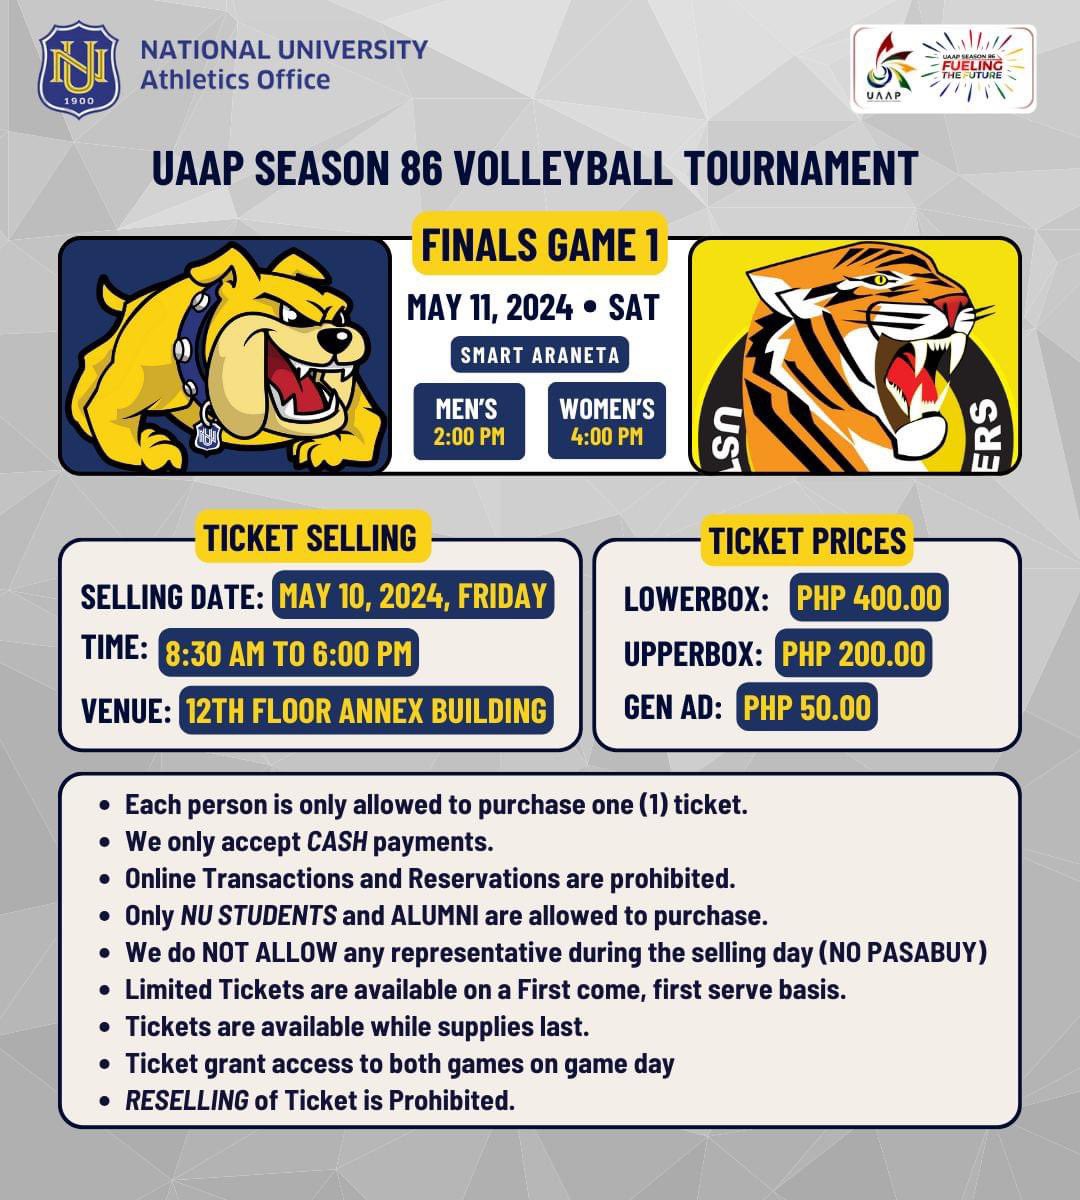 TICKET UPDATE ‼️

Please refer to the guidelines for ticket purchasing as released by the Athletics Office.

#GoBulldogs #NULetsGo #UAAPSeason86